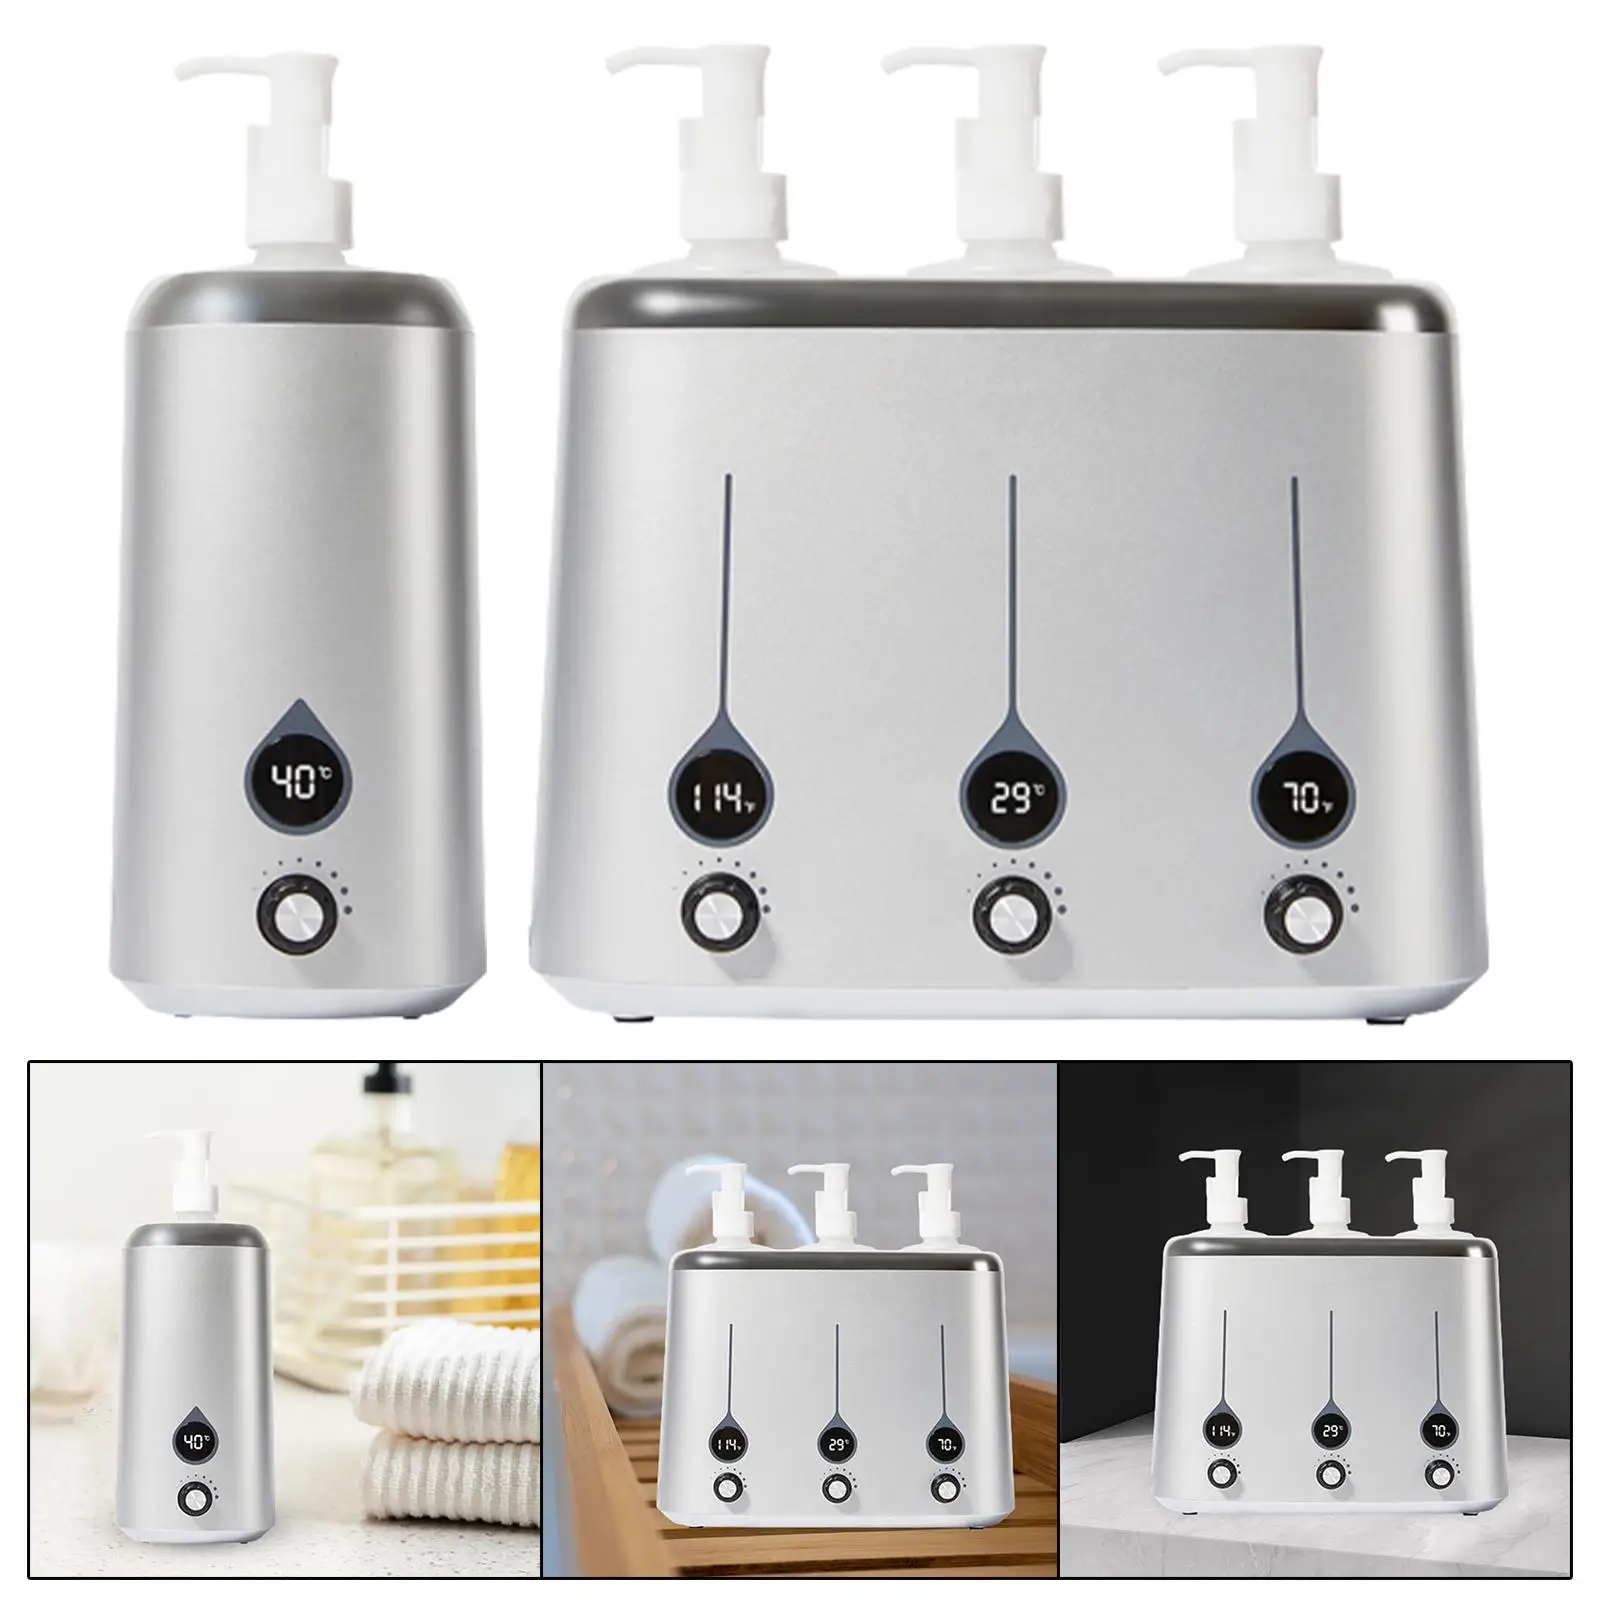 Massage Oil Warmer Adjustable Temperature Fast Heating LED Screen Lotion Warmer for Home Use Hotel Salon SPA massage Shop